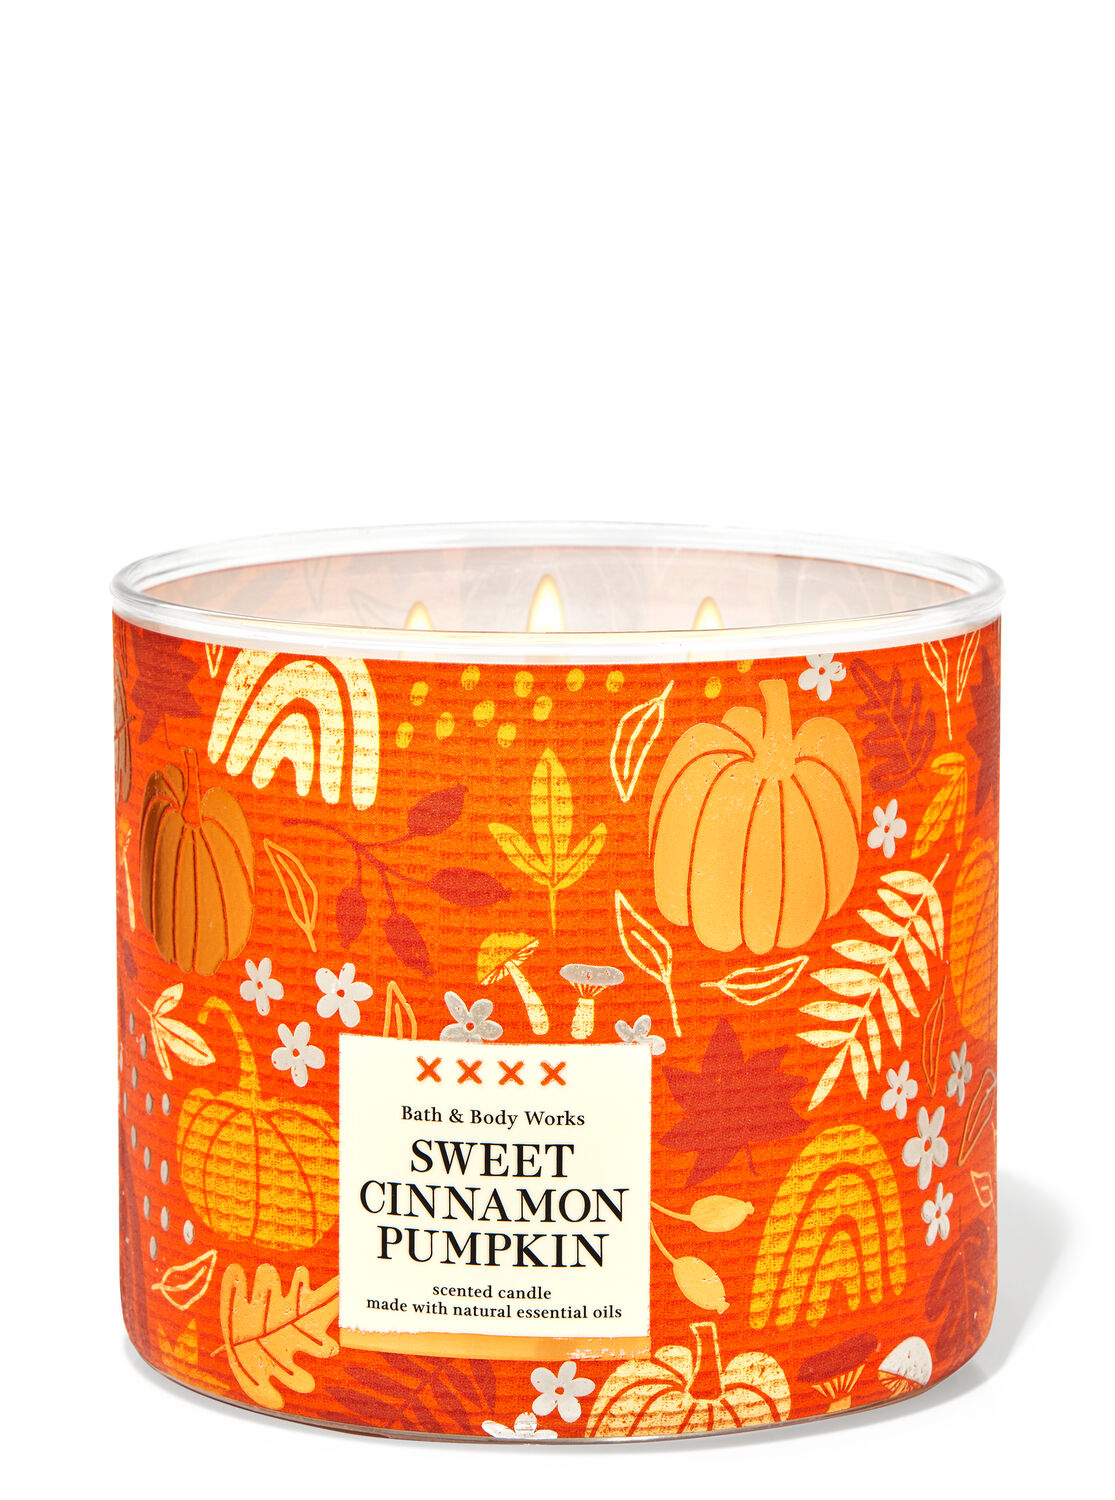 1 Bath & Body Works WHITE PUMPKIN Large 3-Wick Scented Candle 14.5 oz 